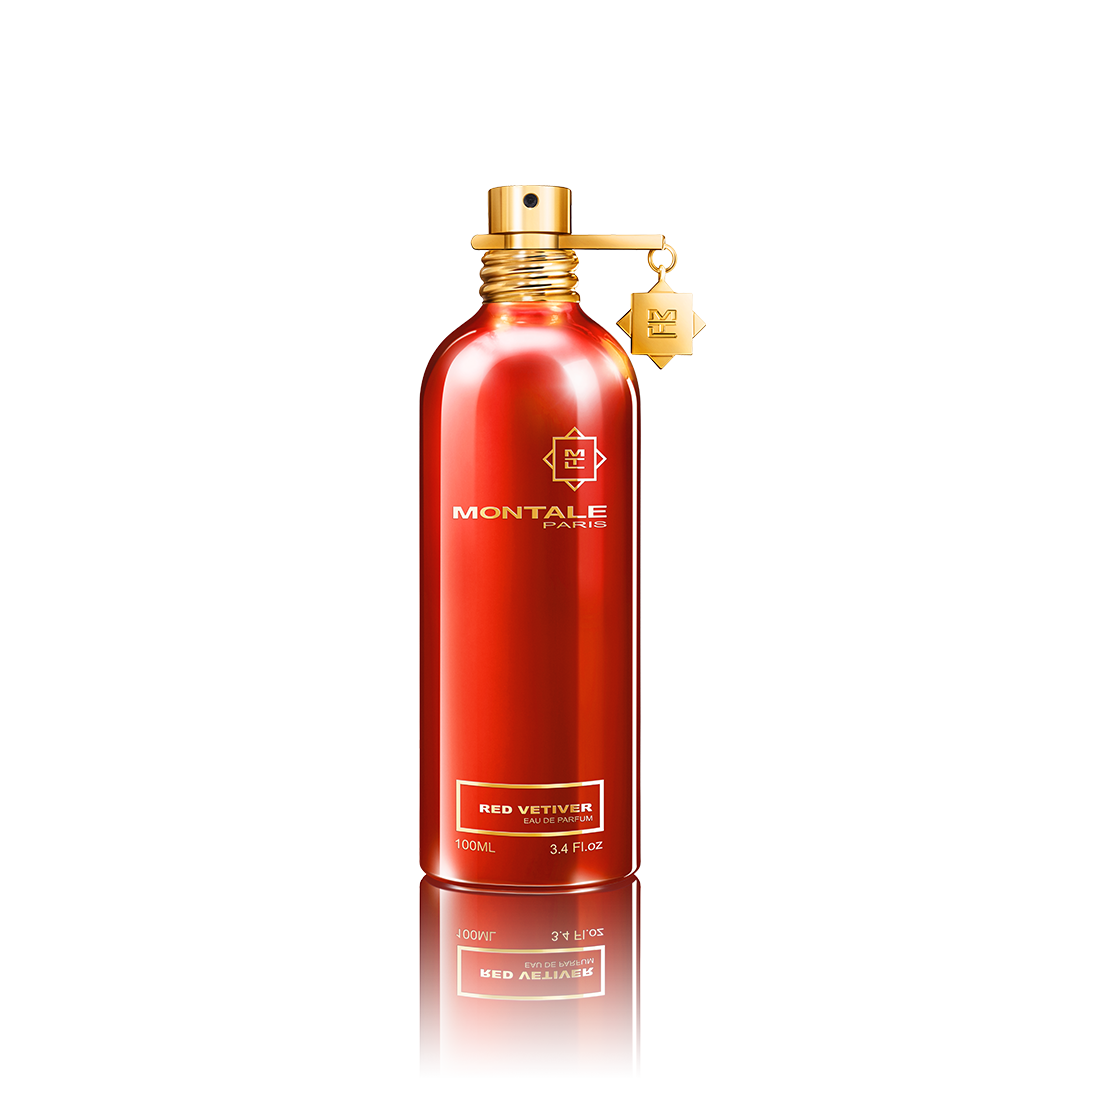 MONTALE - RED VETIVER